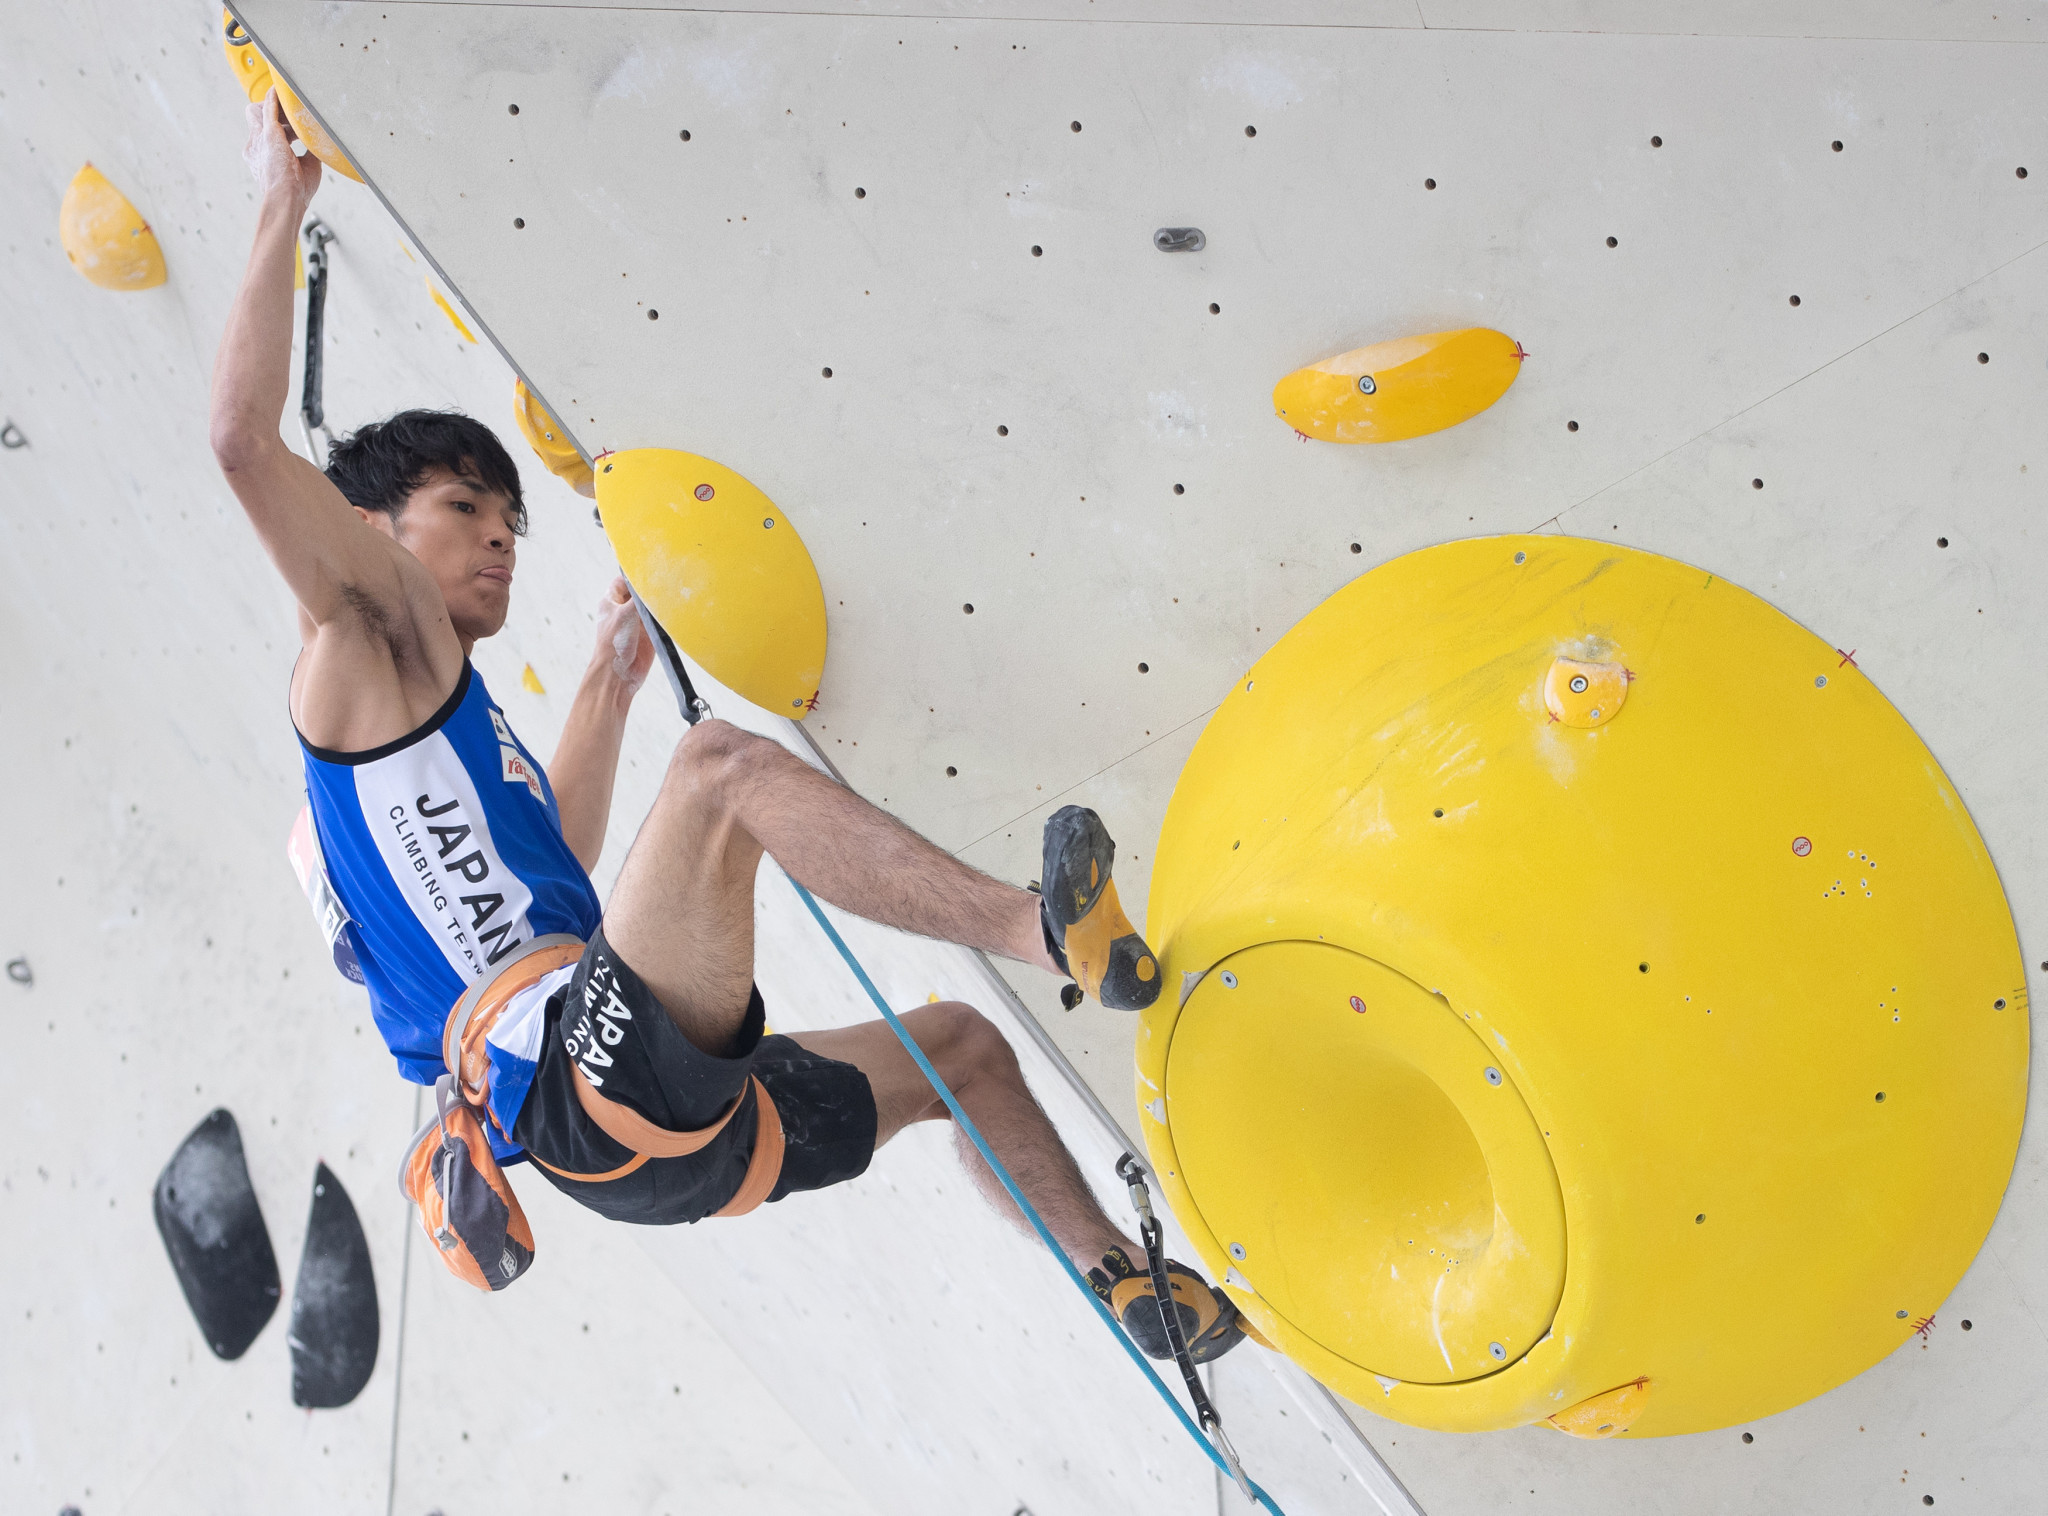 Japan's Meichi Narasaki won the men's combined title at the IFSC Asian Championships in Kurayoshi today ©Getty Images  